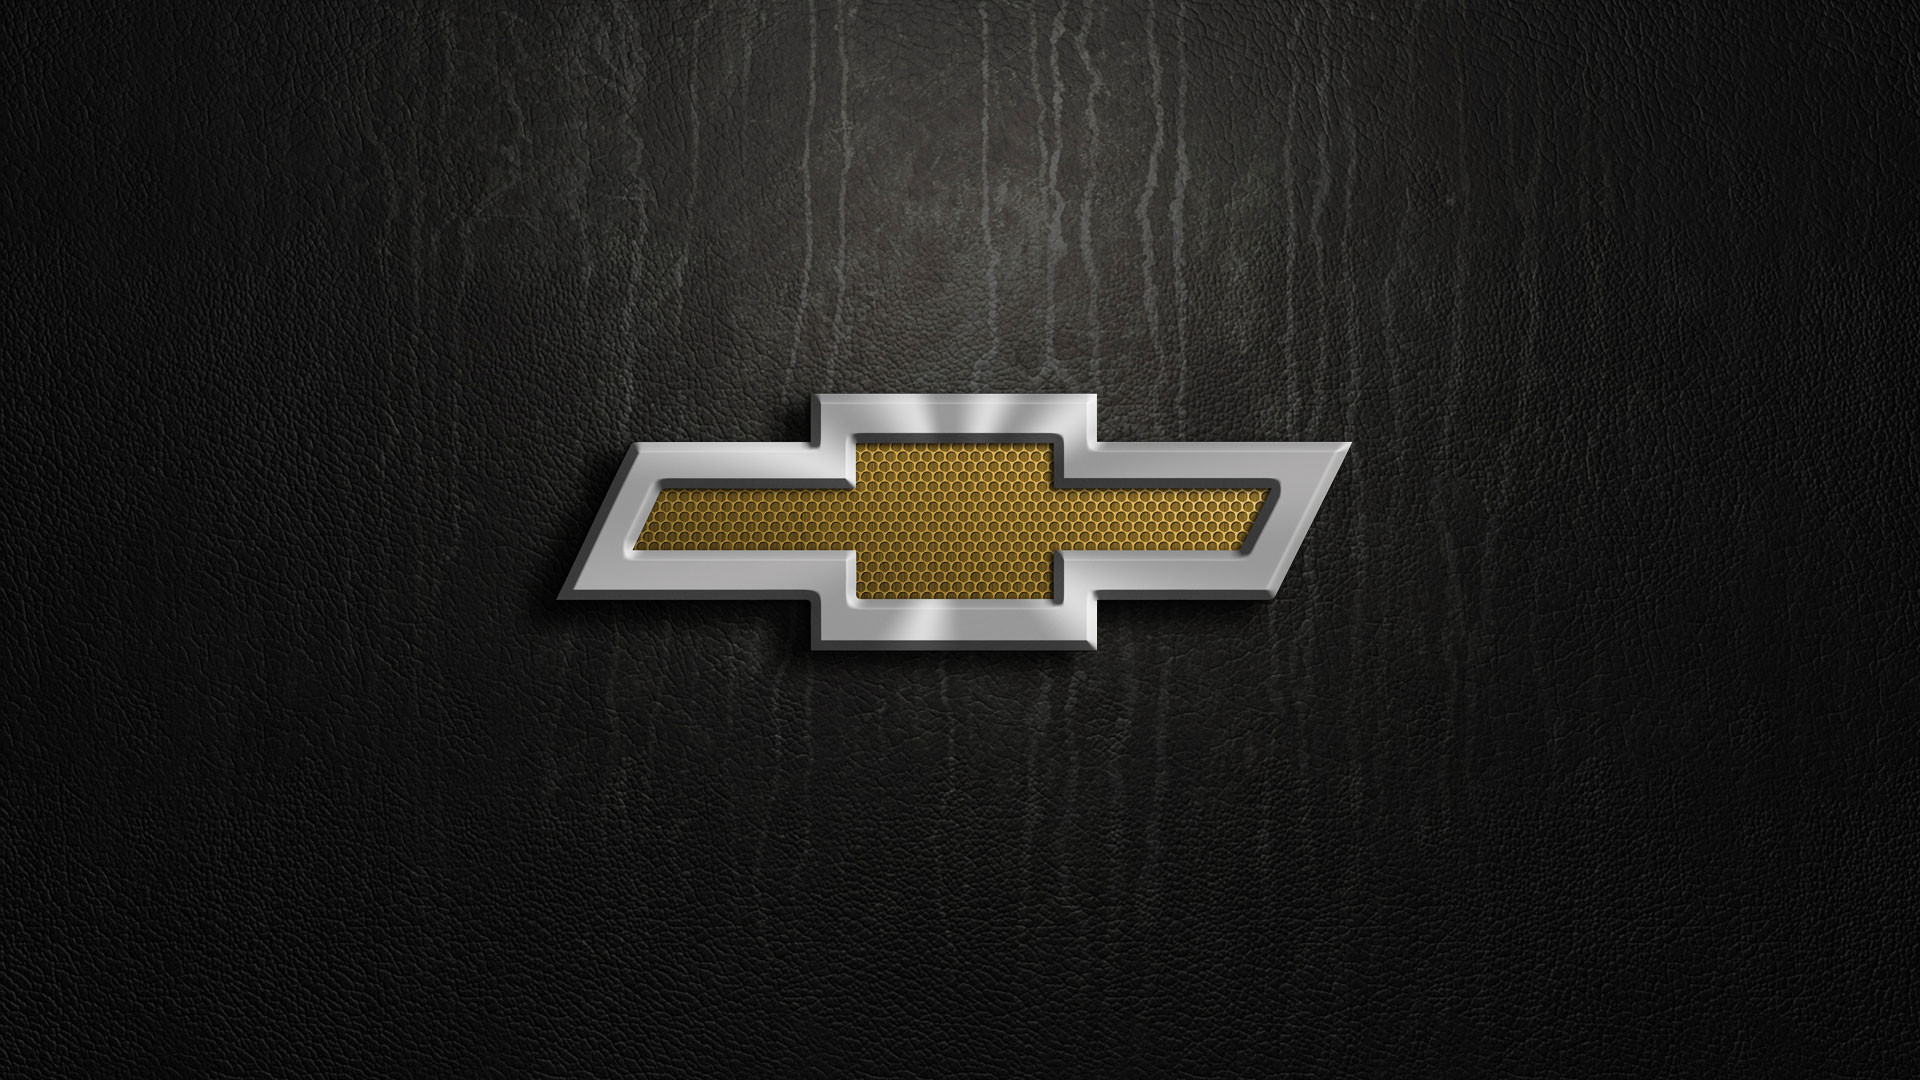 Chevy iPhone Wallpaper Image